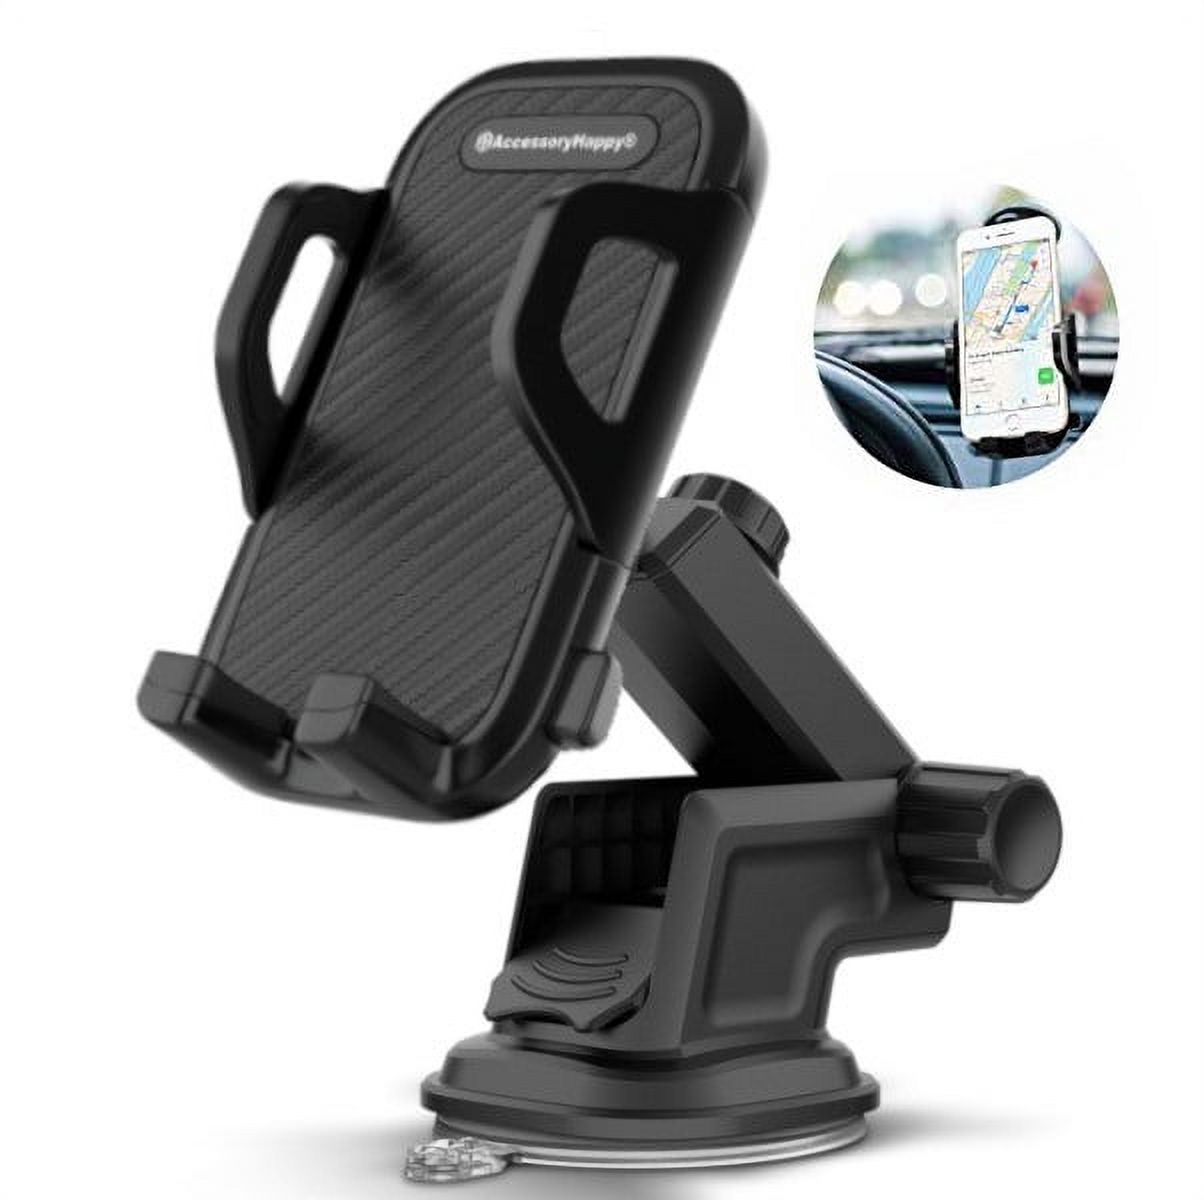 AccessoryHappy Dash Windshield Office Desk Phone Mount Universal Adjustable Multi-Angle Car Mount for Holder Stand Cell Phone iPhone Xs/XS Max/X/8/7 Plus/Galaxy - image 1 of 8